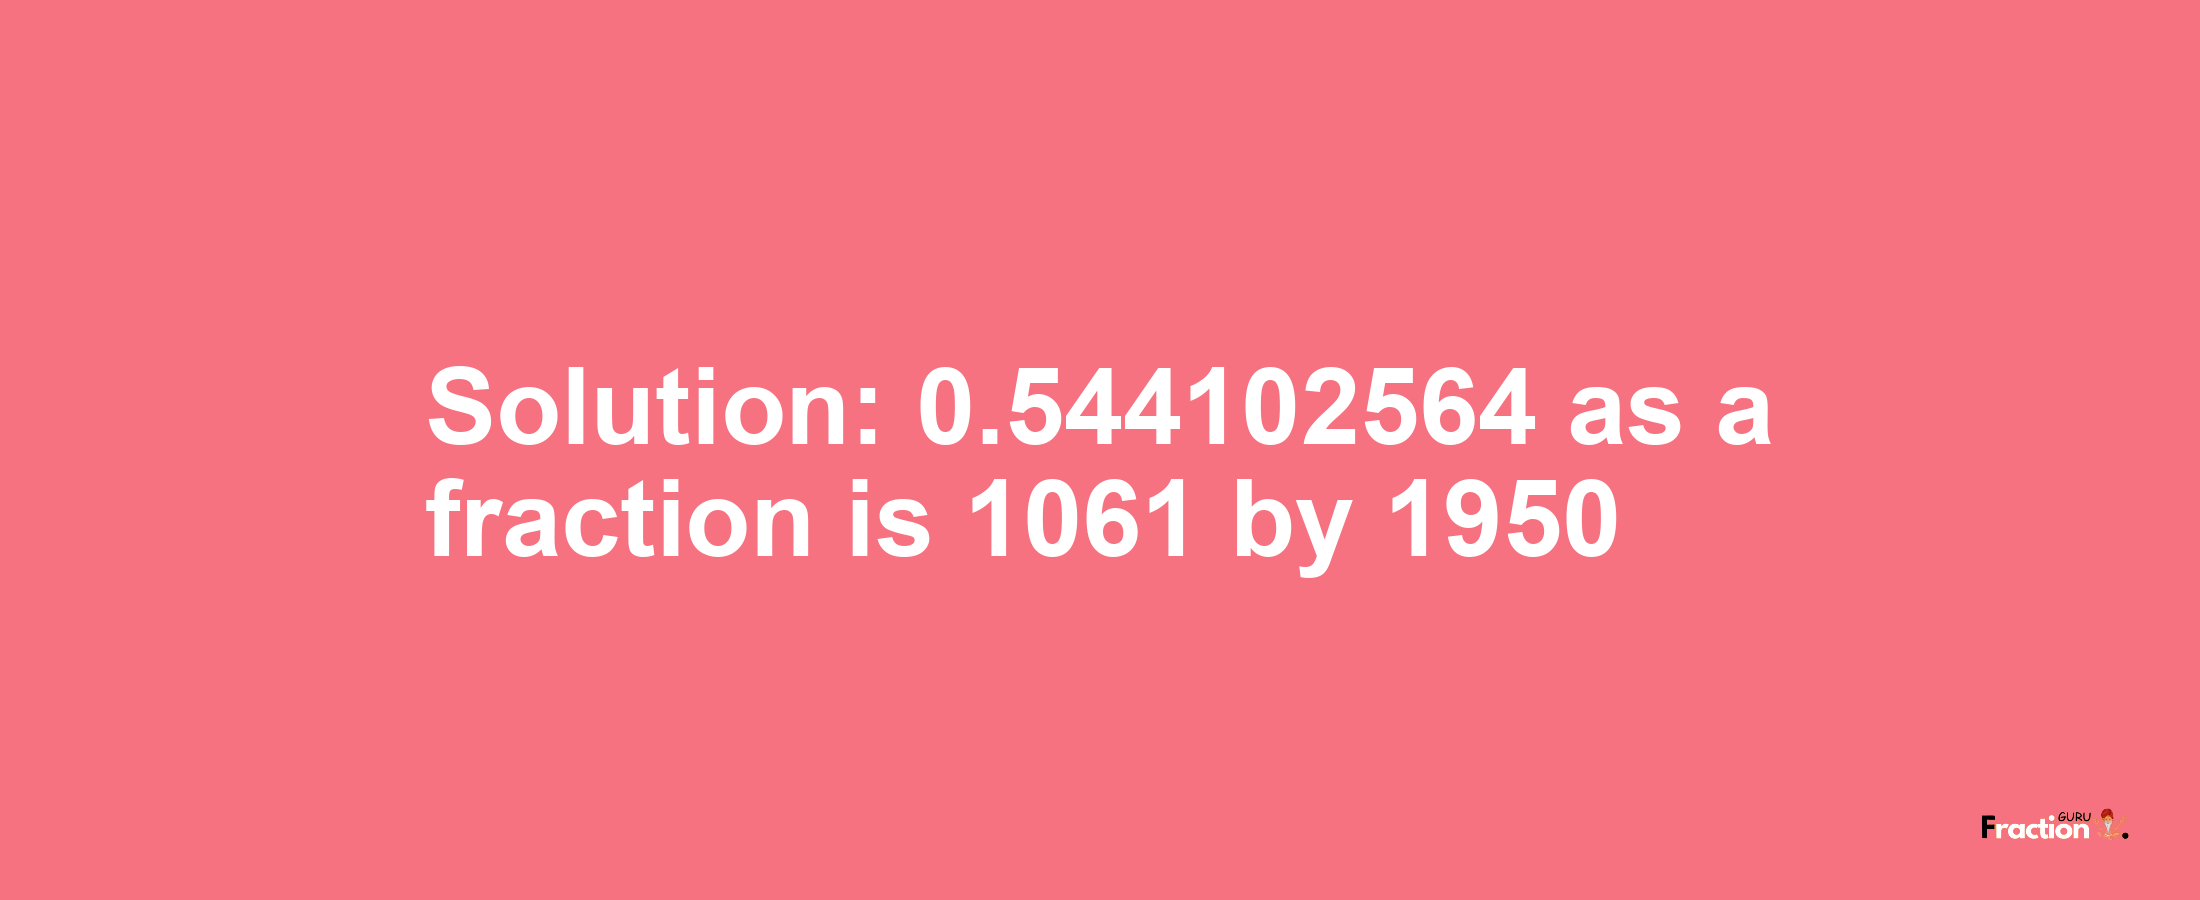 Solution:0.544102564 as a fraction is 1061/1950